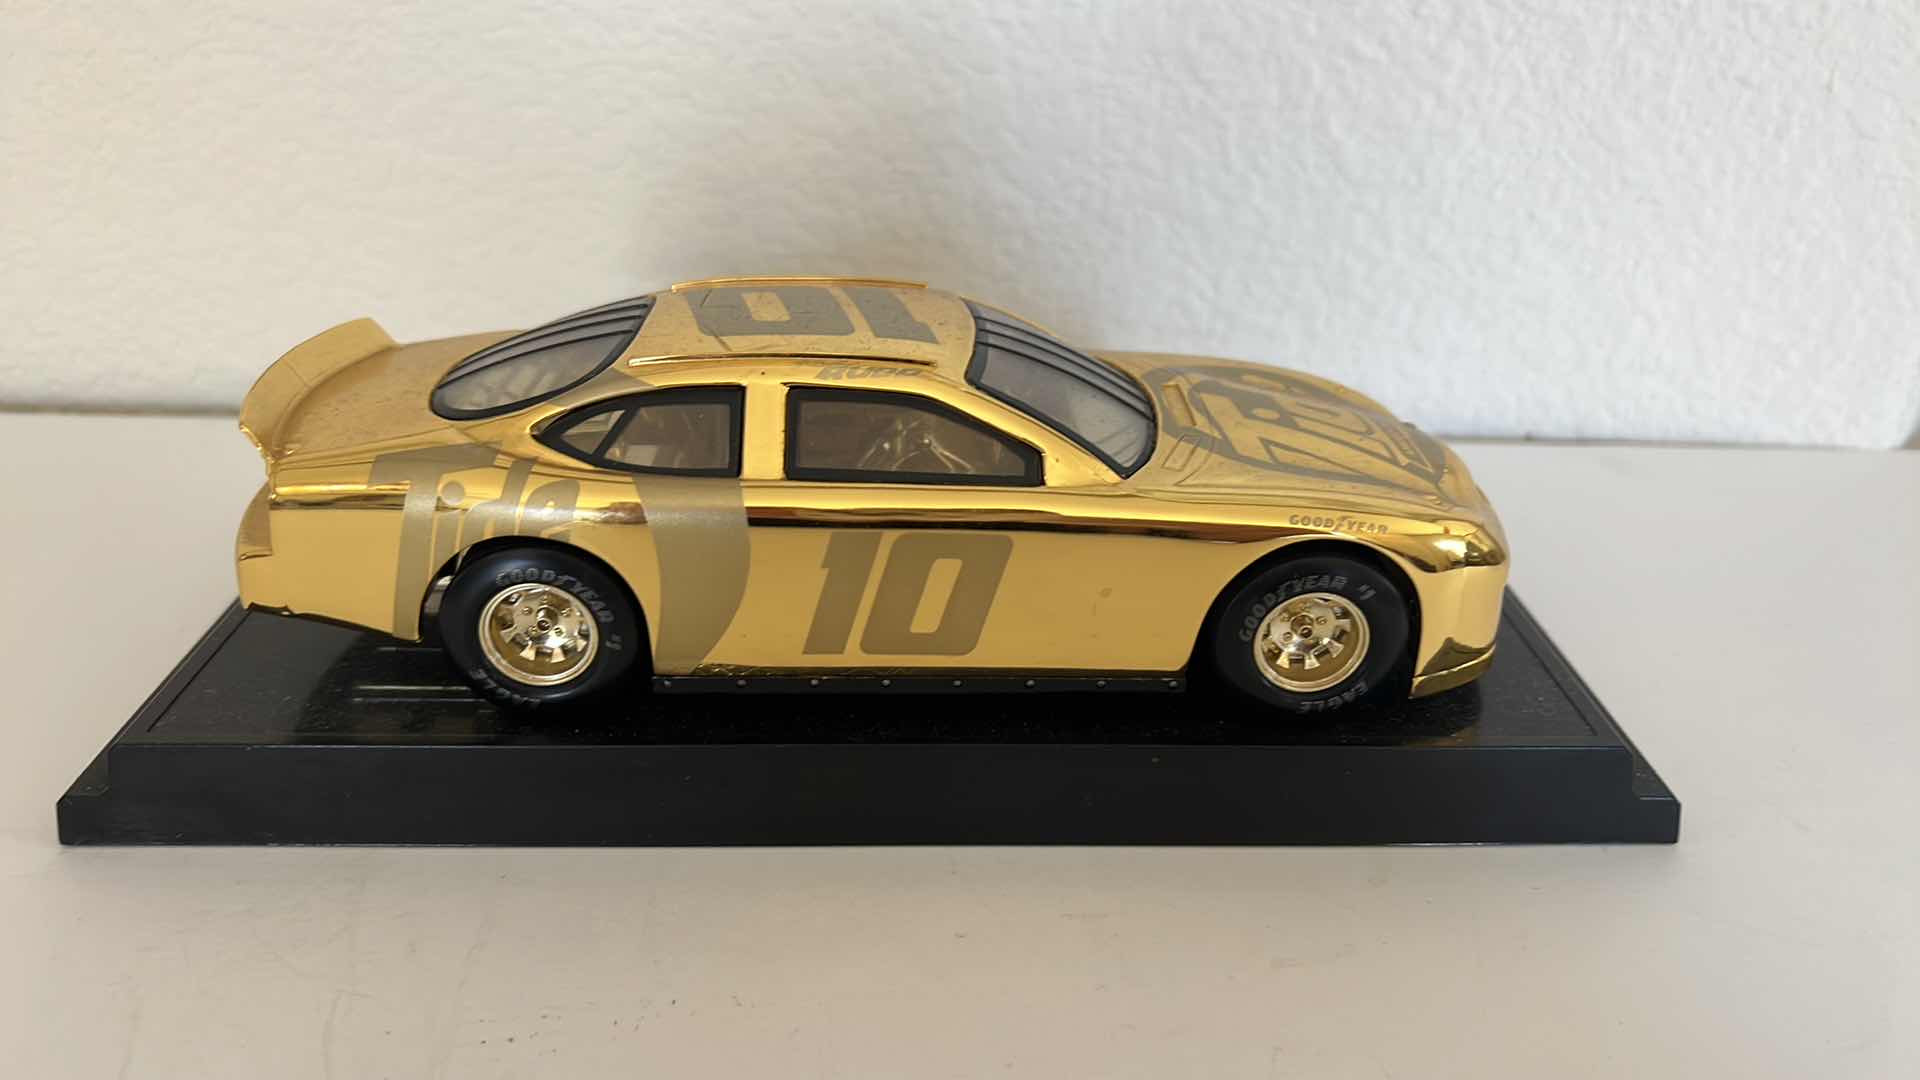 Photo 4 of FORD TAURUS NASCAR “REFLECTIONS IN GOLD” DIE CAST MODEL CAR